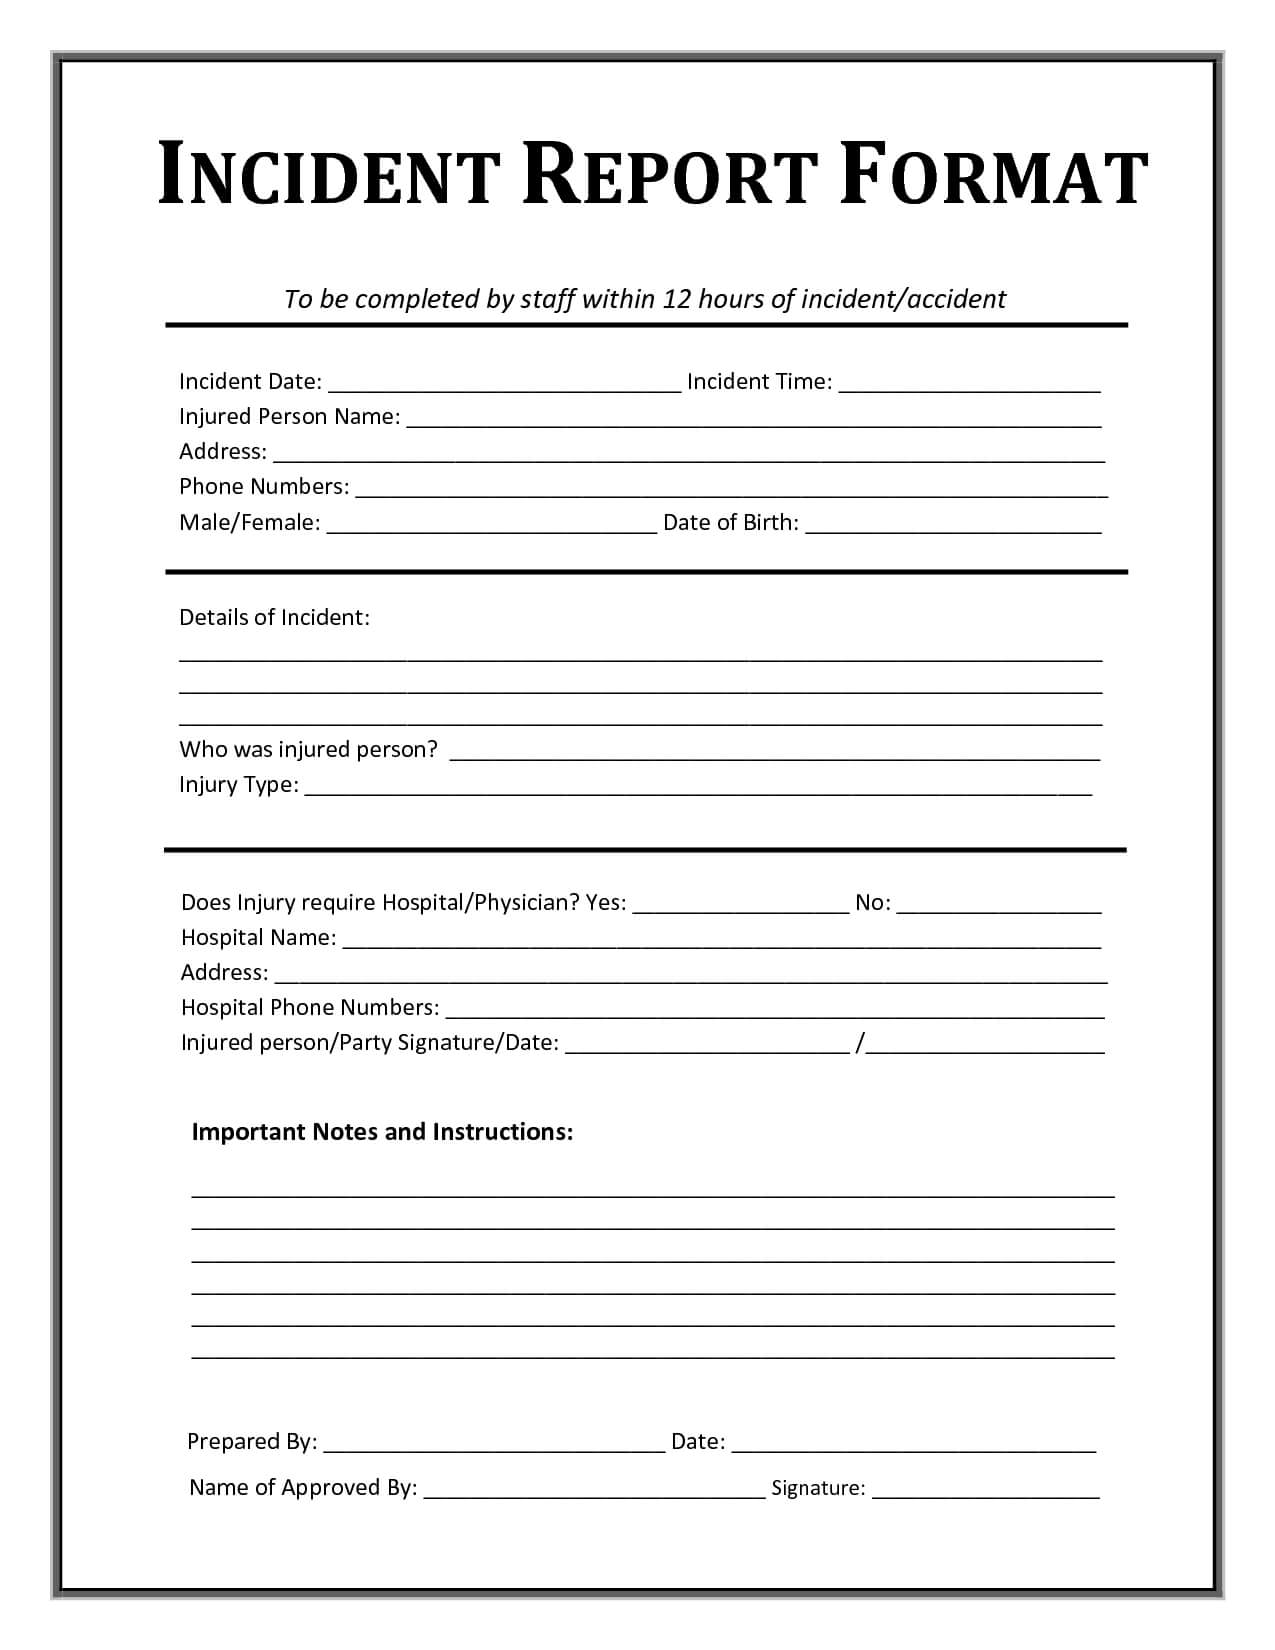 Incident Report Form Template Microsoft Excel | Report With Generic Incident Report Template